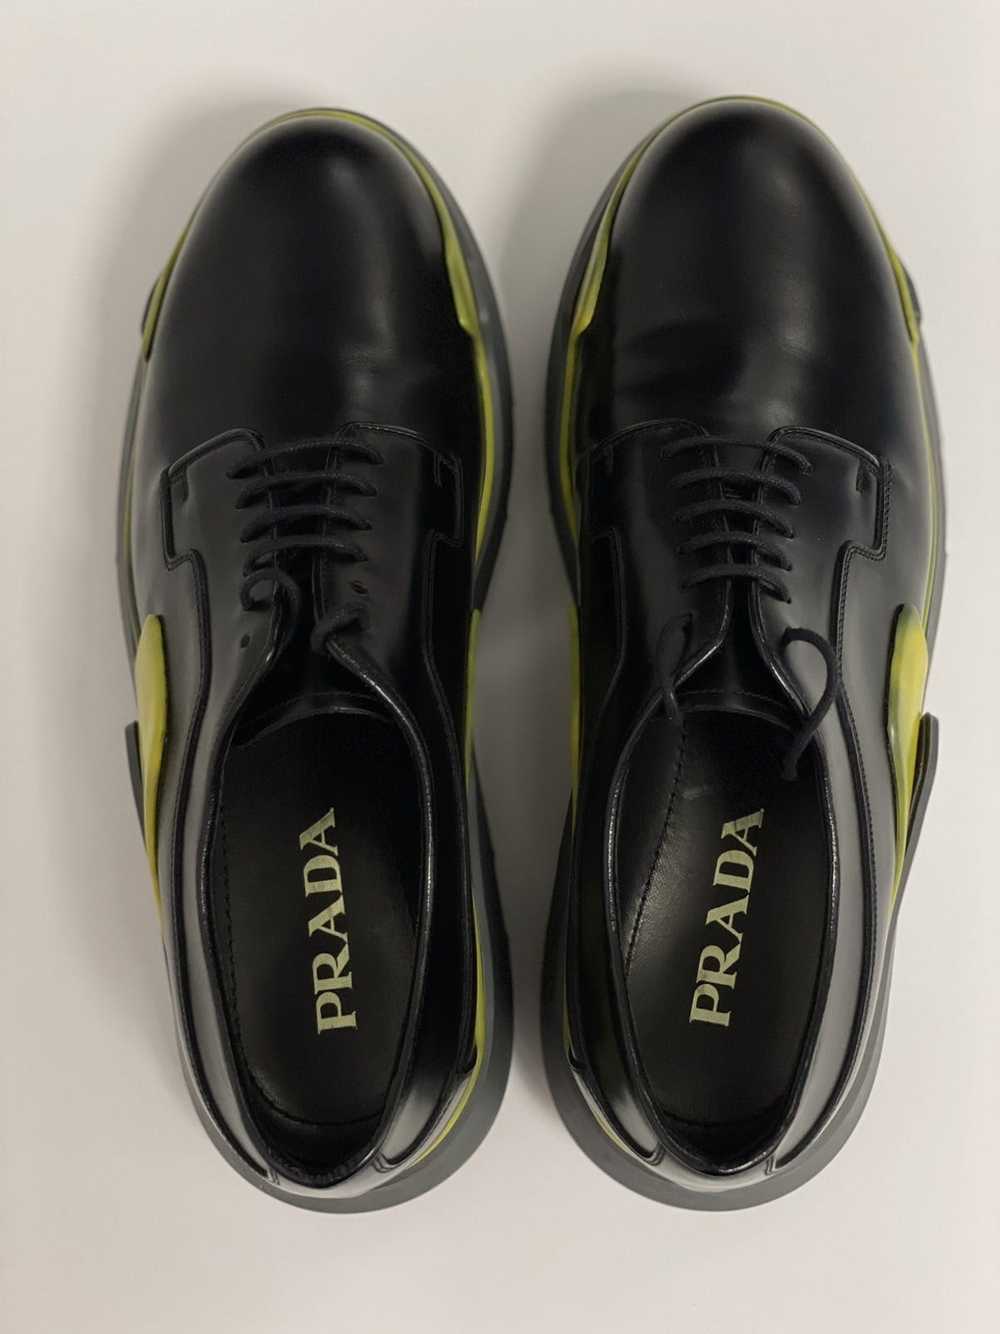 Prada Heavy-Duty Rubber Sole Leather Lace-up Shoes - image 6